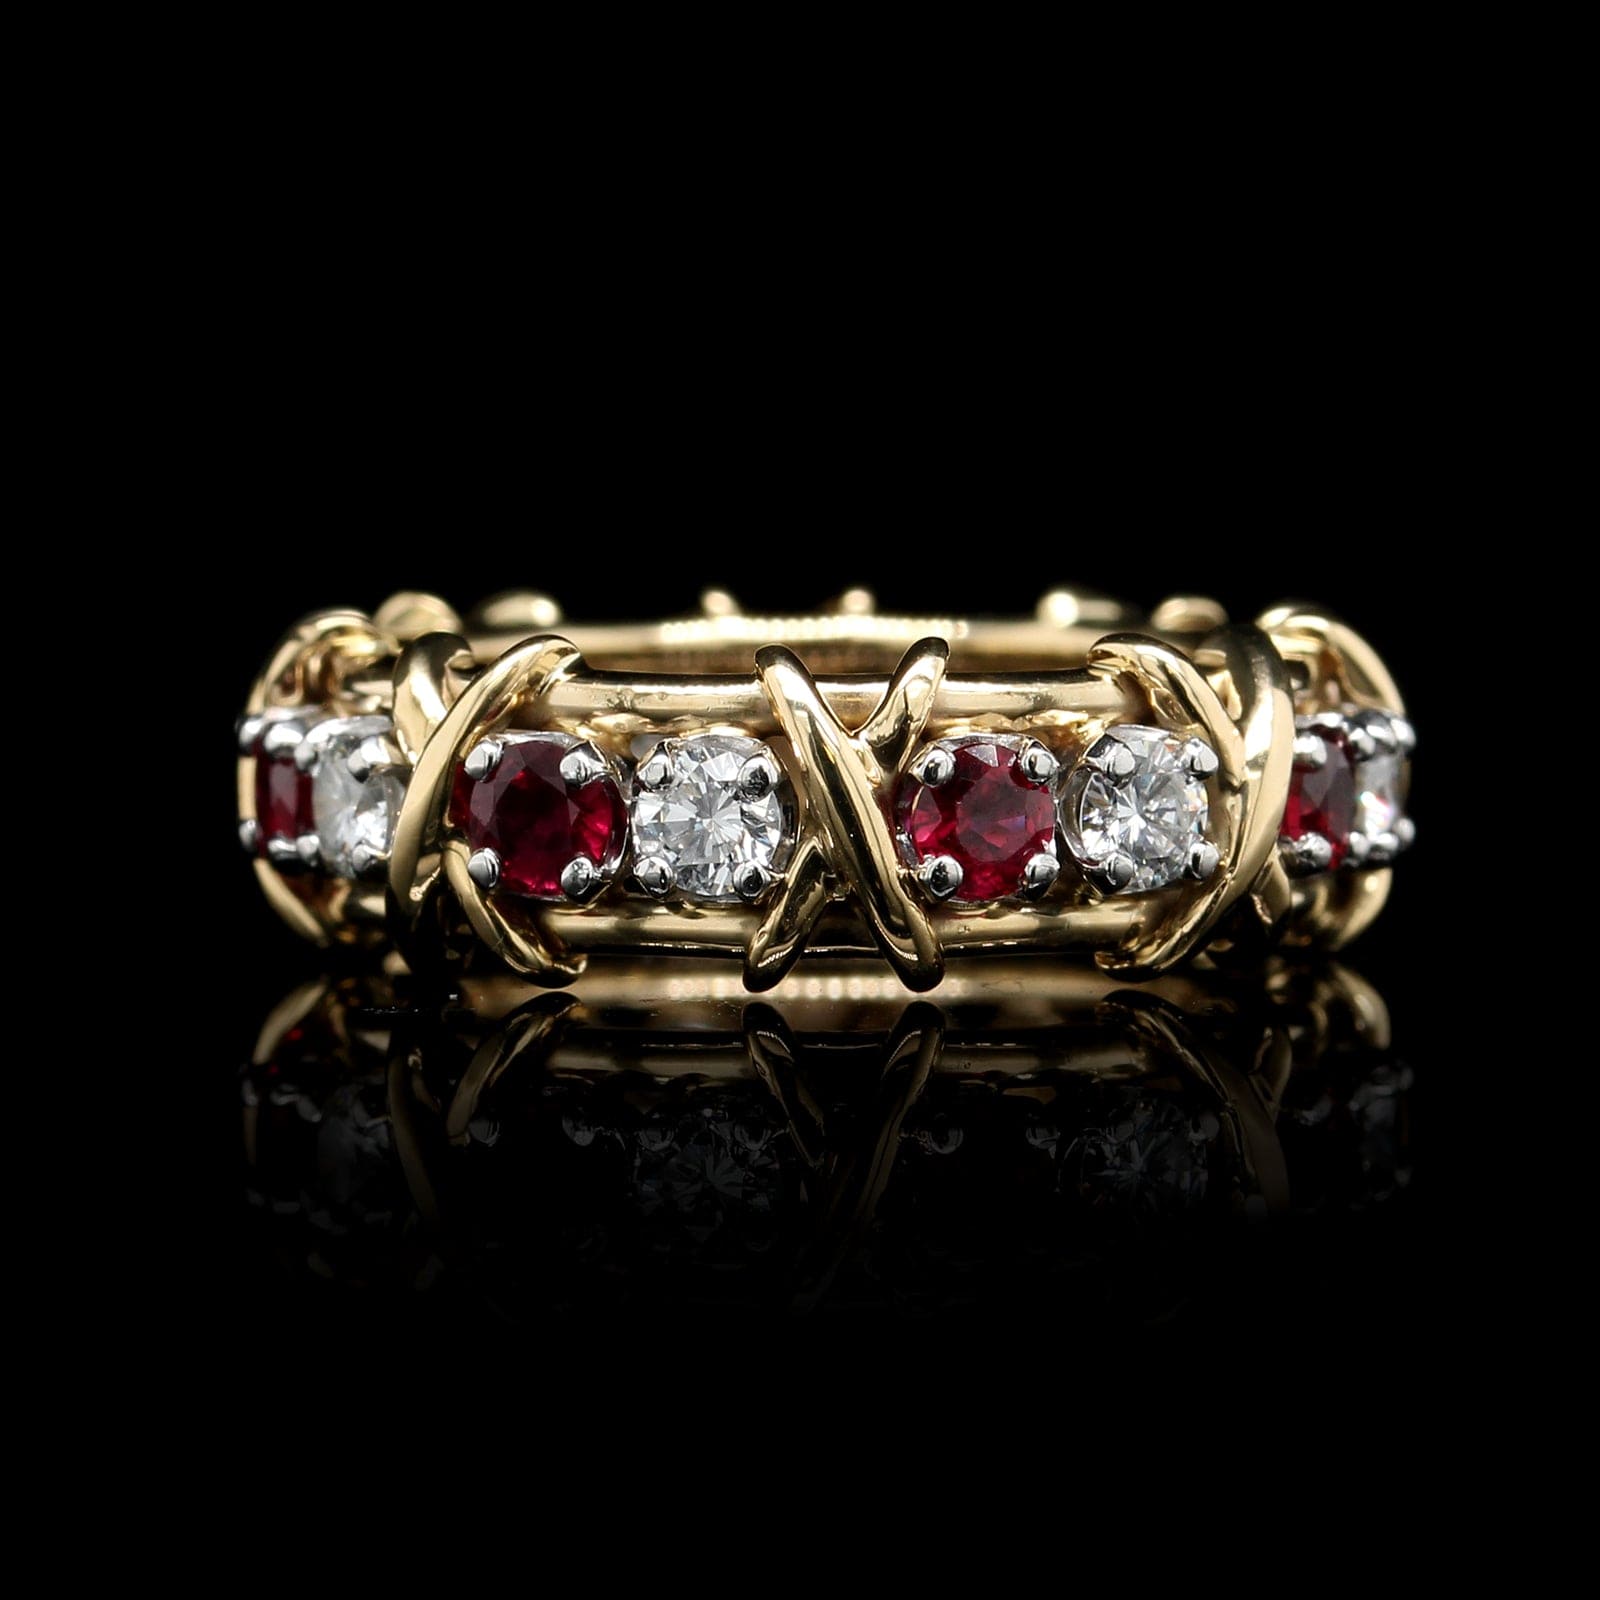 Tiffany & Co. 18K Yellow Gold and Platinum Estate Schlumberger Sixteen Stone Ruby and Diamond Ring